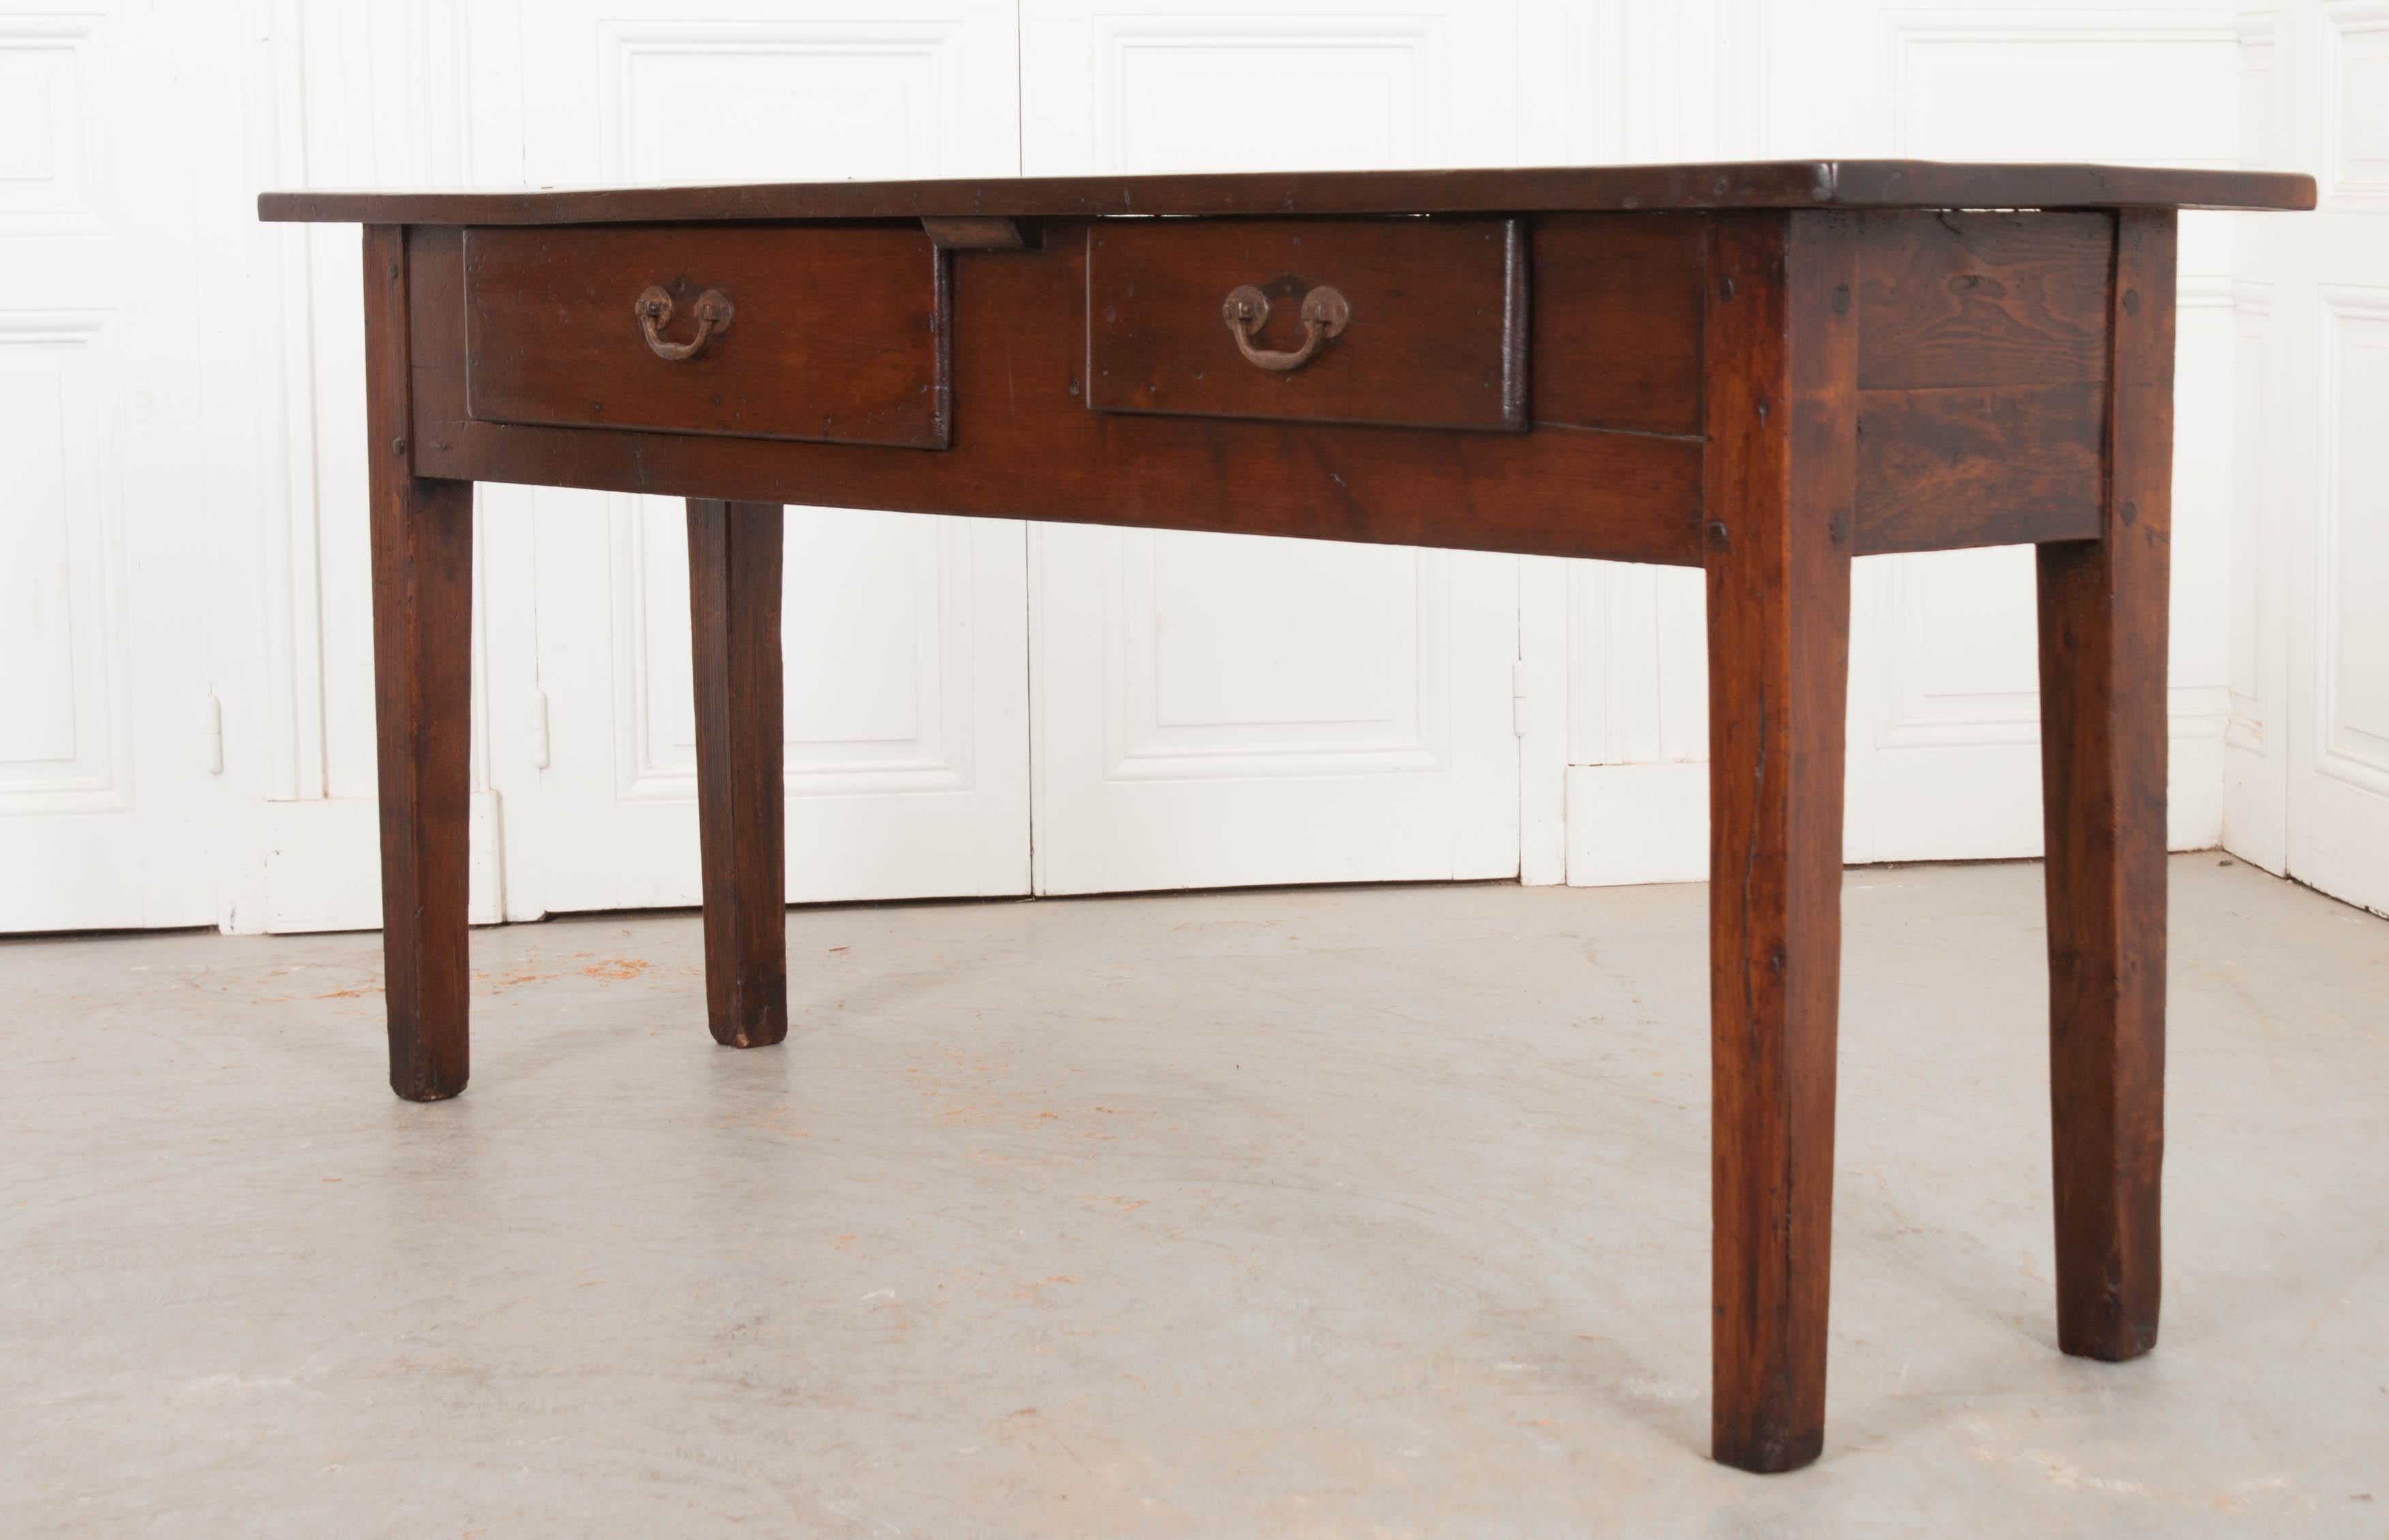 This handsome Provincial oak server, circa 1830s, is from France and has developed a beautiful patina over time. Of pegged construction, the two-plank surface rests upon an apron outfitted with two dove-tailed drawers, one large drawer ideal for